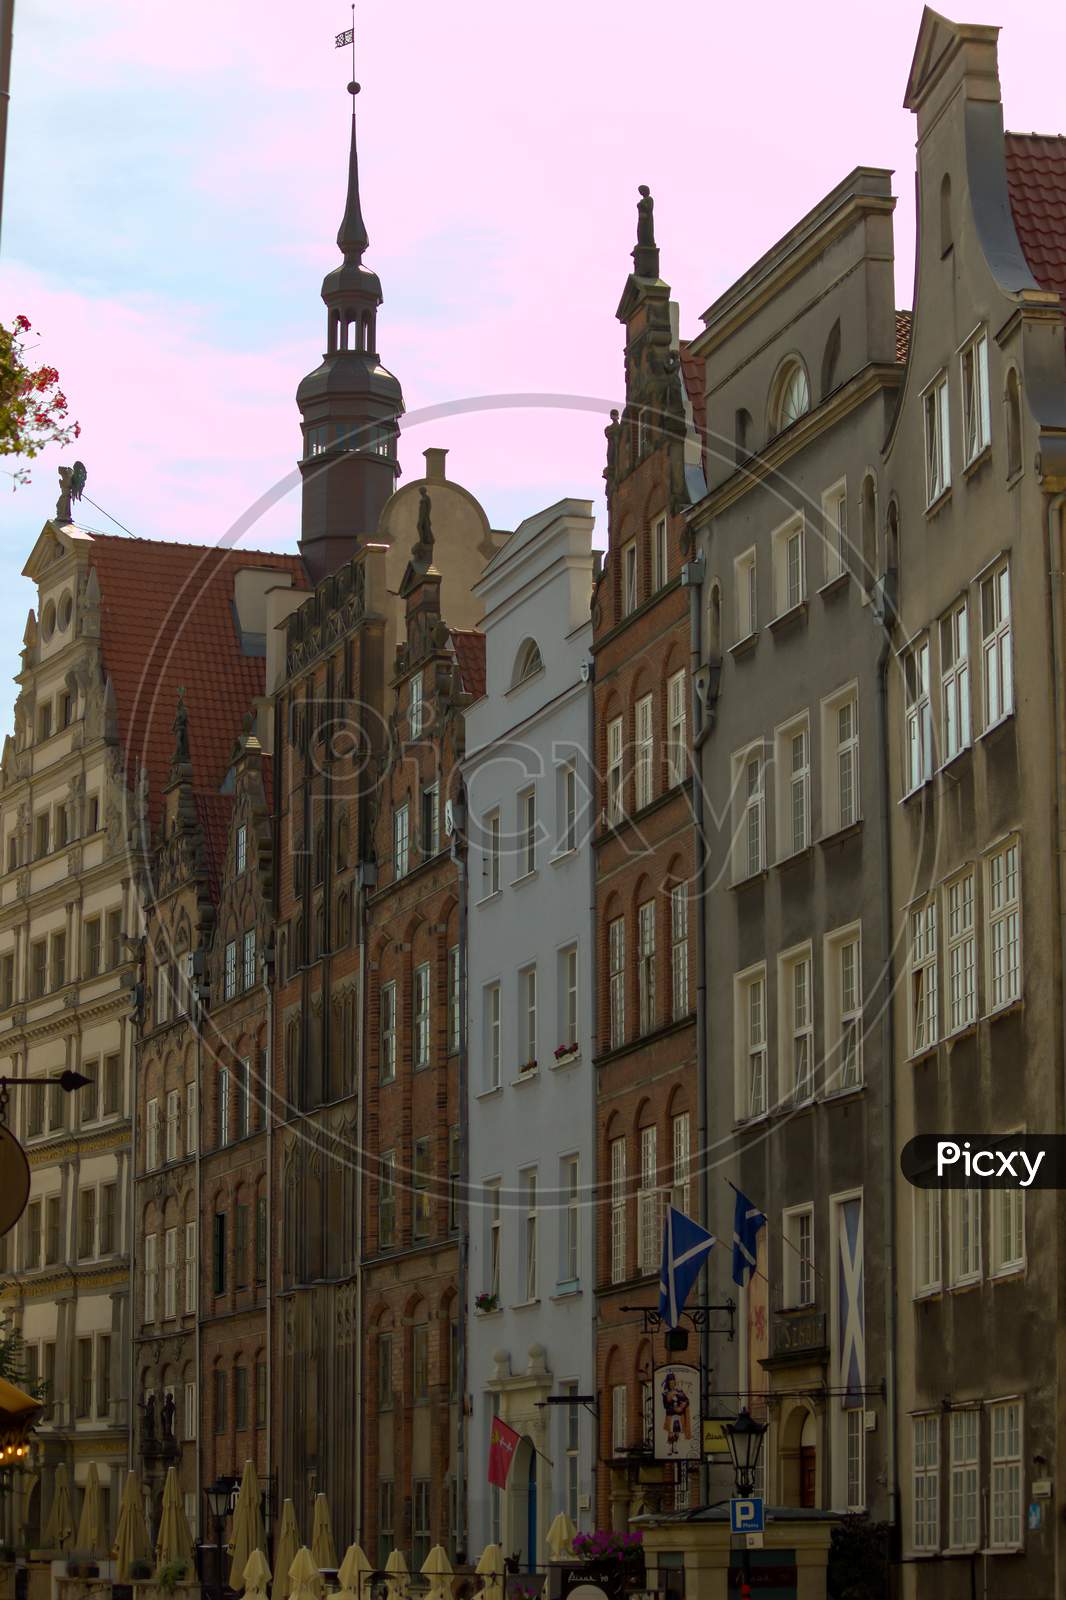 Gdansk, North Poland - August 15, 2020: Closeup Of Colorful Polish Medieval Architecture Building Built Closely Next To Each Other